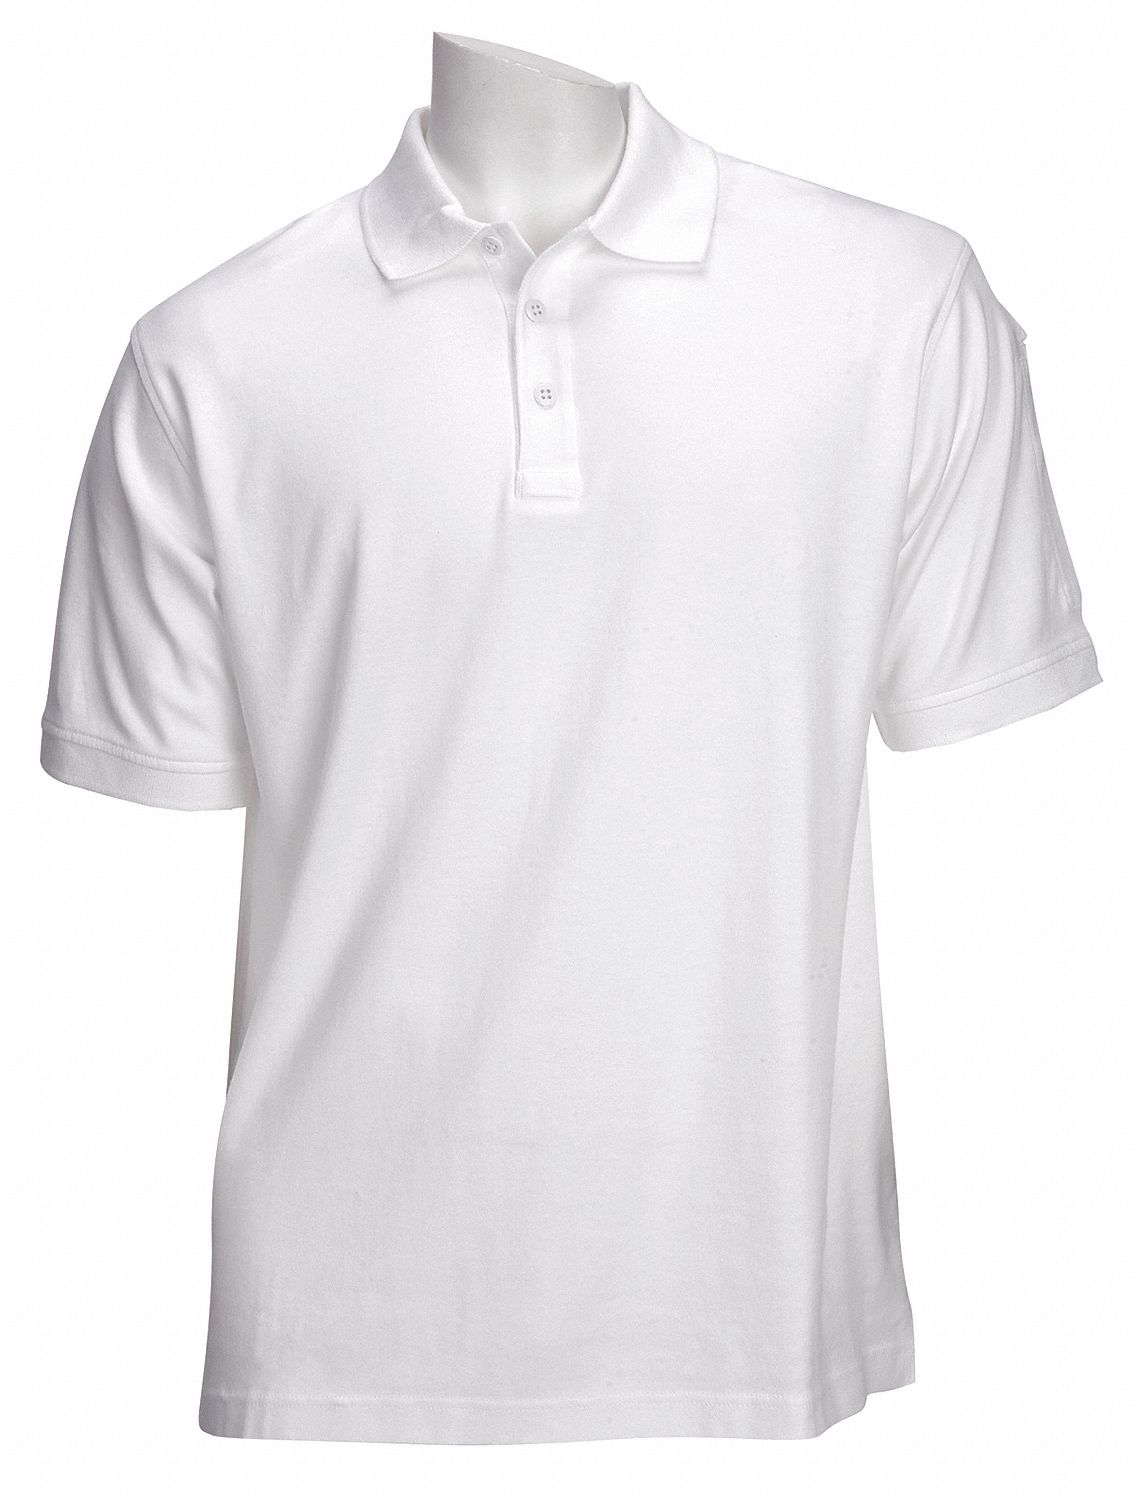 5.11 TACTICAL Performance Polo, White, XL - 6YJX9|71049 - Grainger